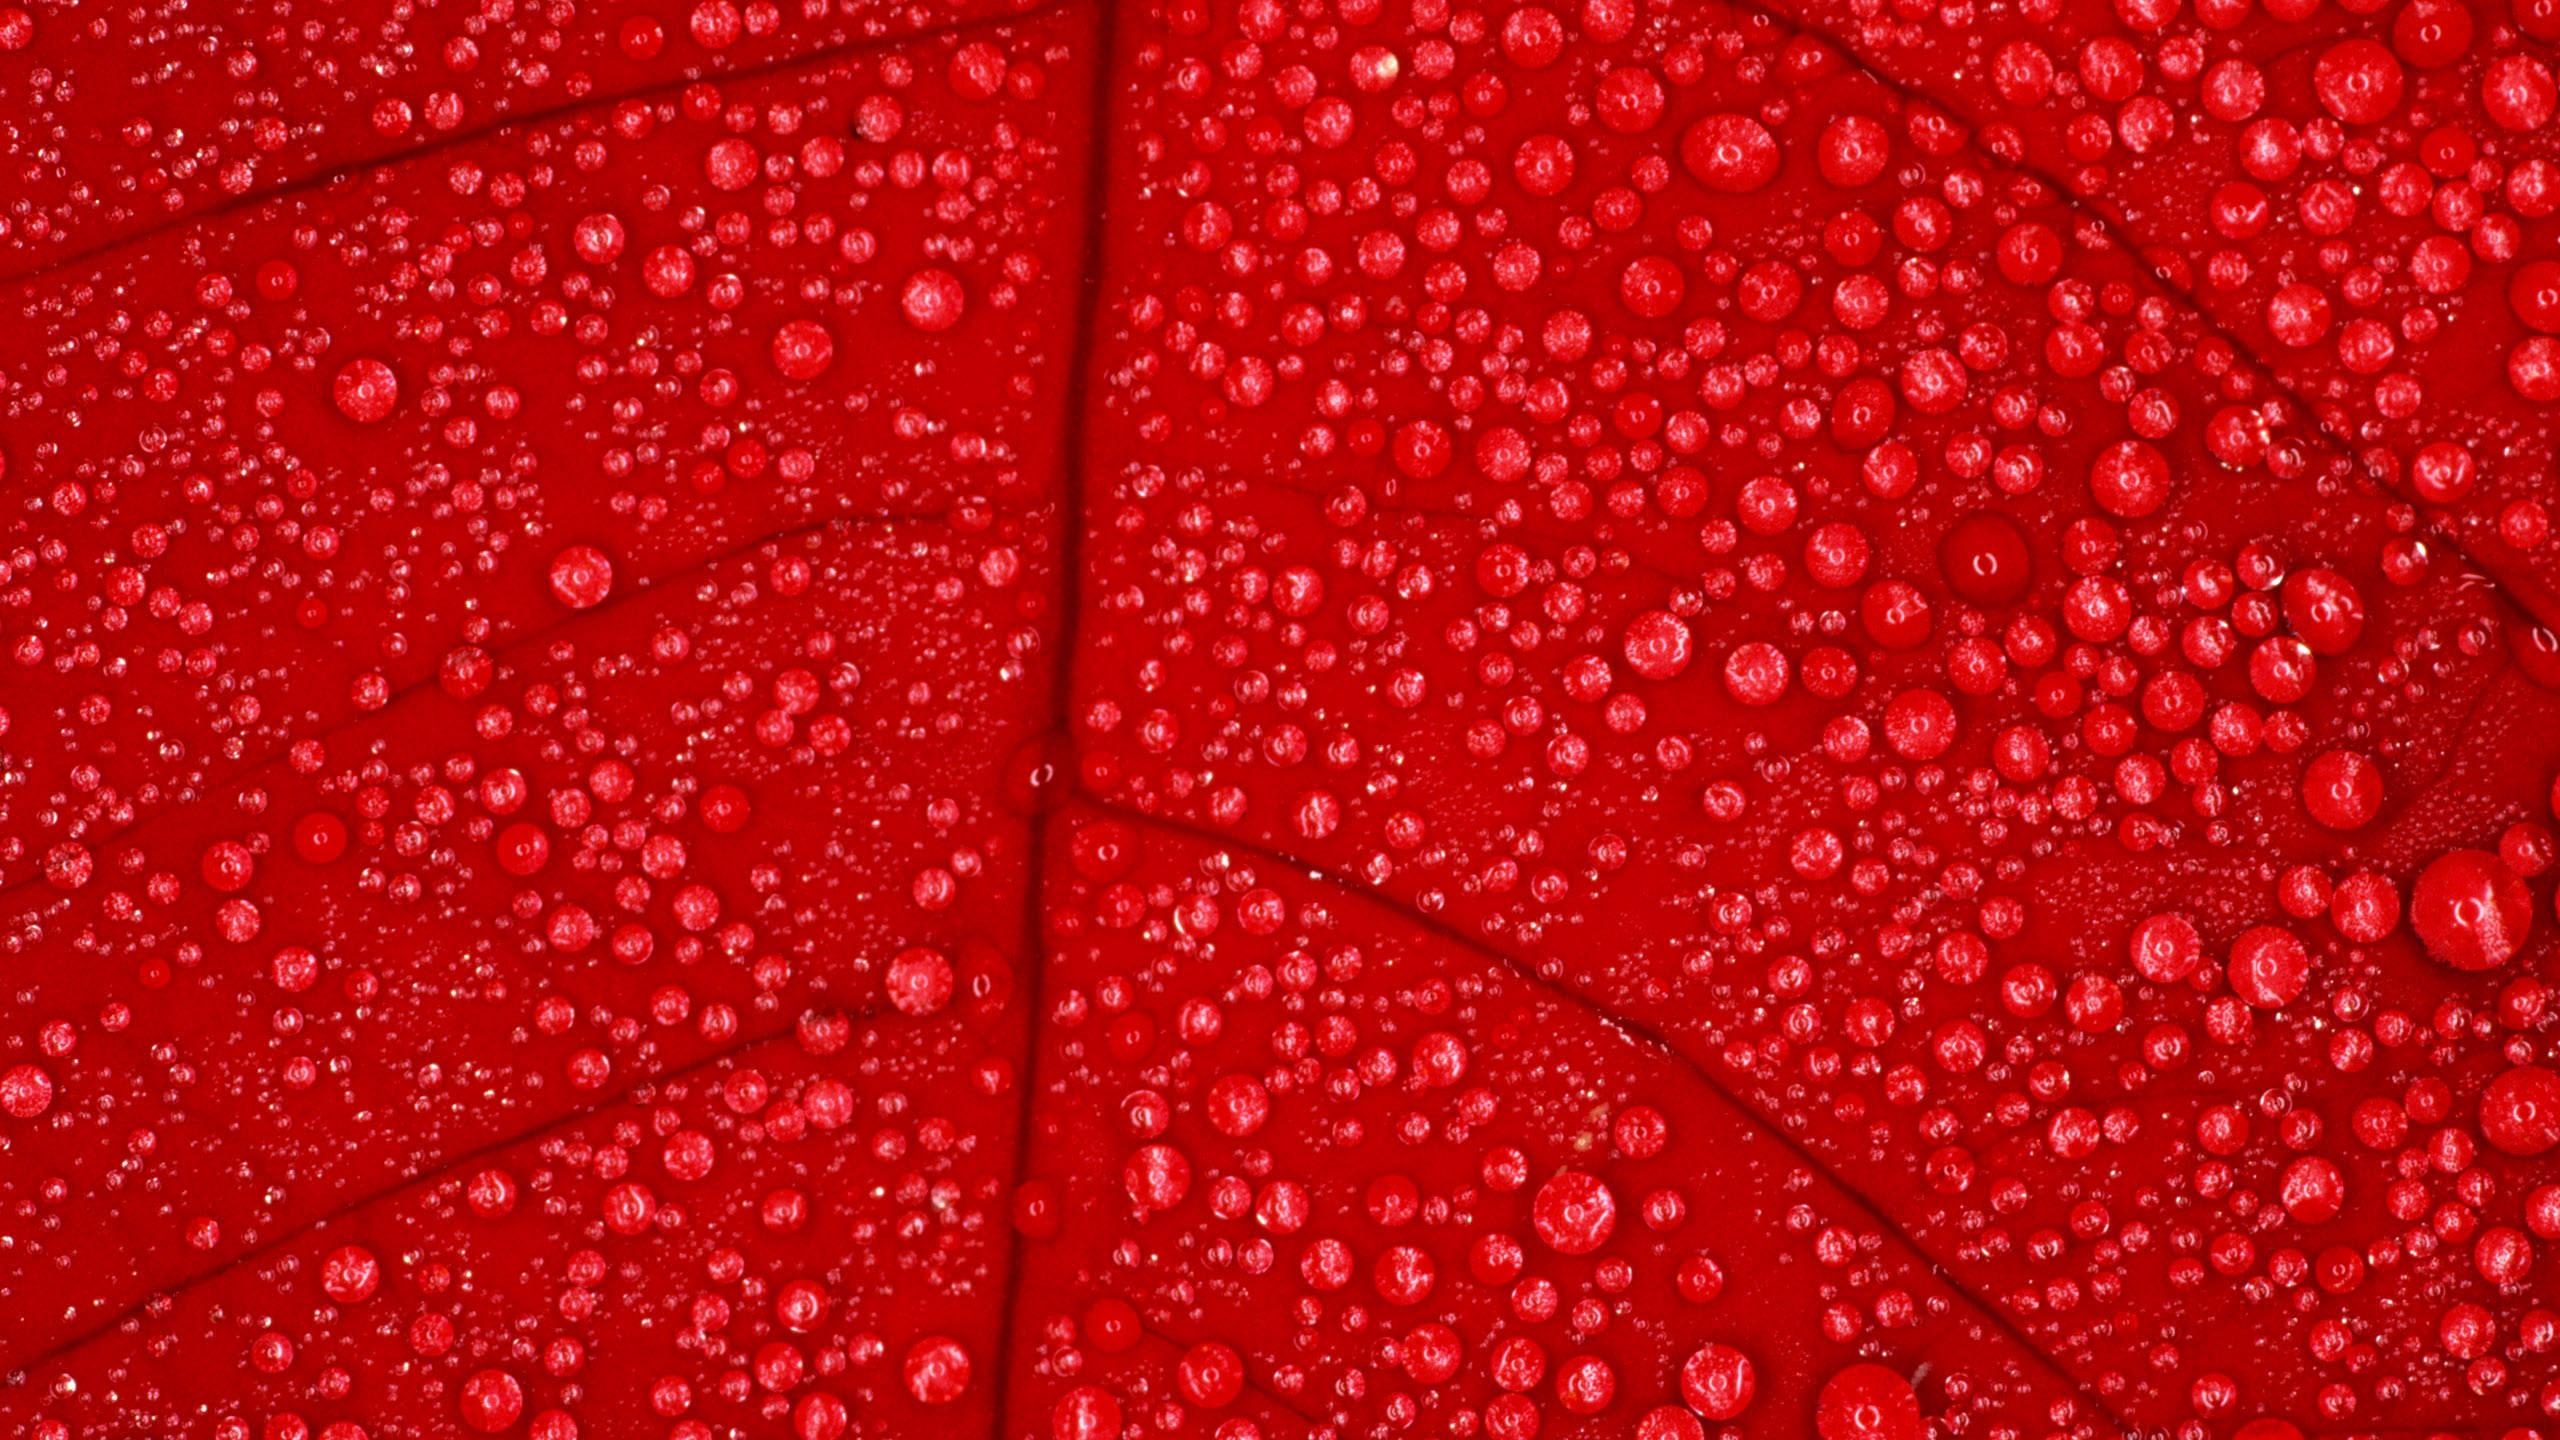 Free photo A red leaf with water droplets